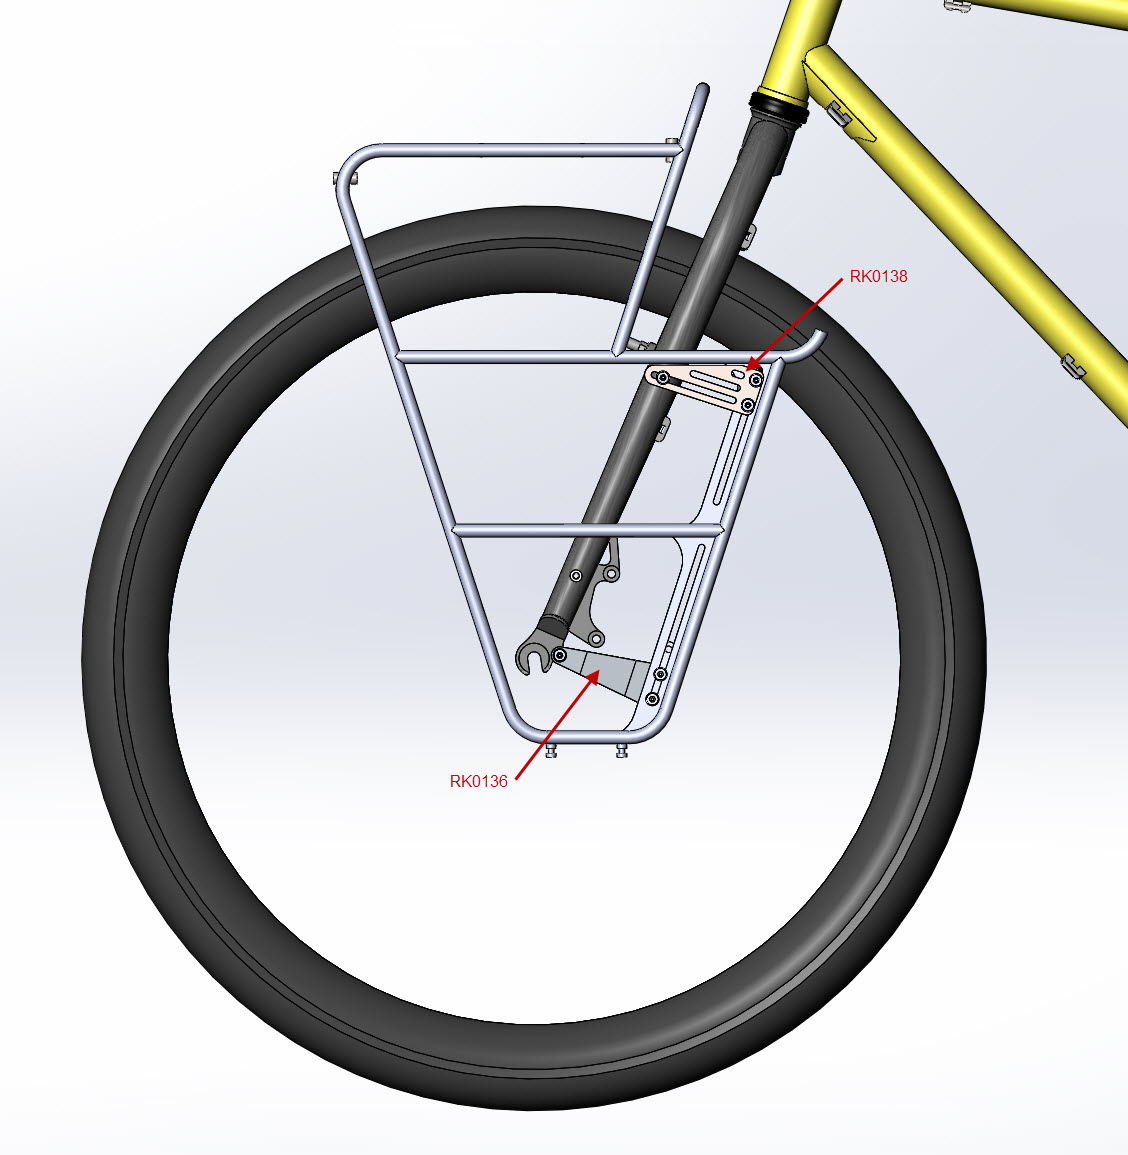 CAD Illustration - Left side view of a Surly Front Rack, mounted - Plate A RK0136 and Plate C RK0138 detail